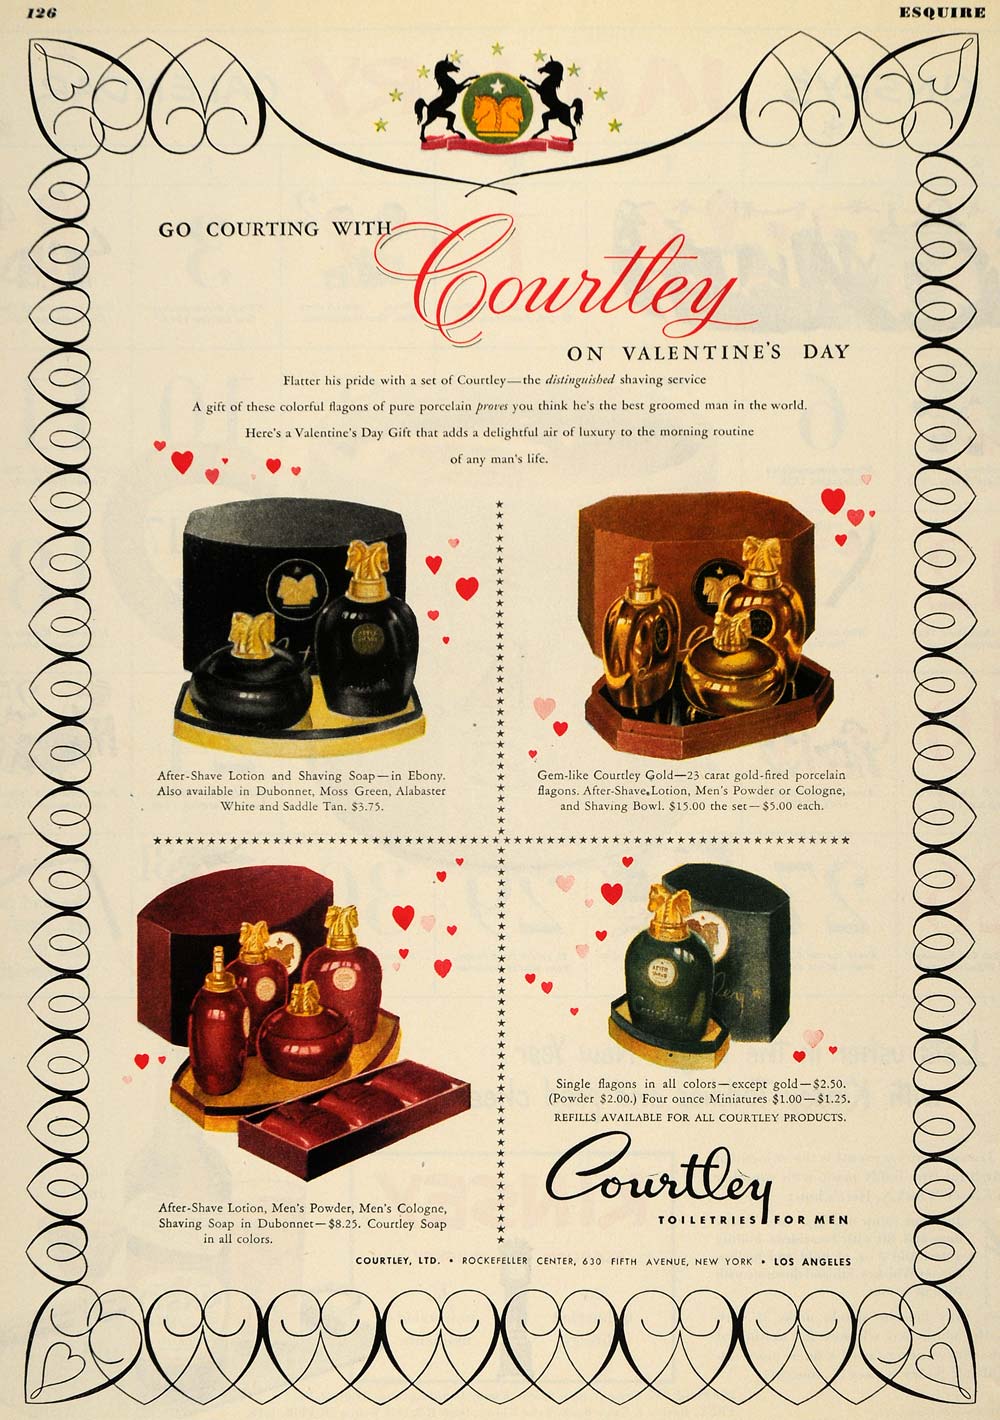 1947 Ad Courtley Valentine's Day Perfume Cologne Toiletry Rockefeller ESQ4